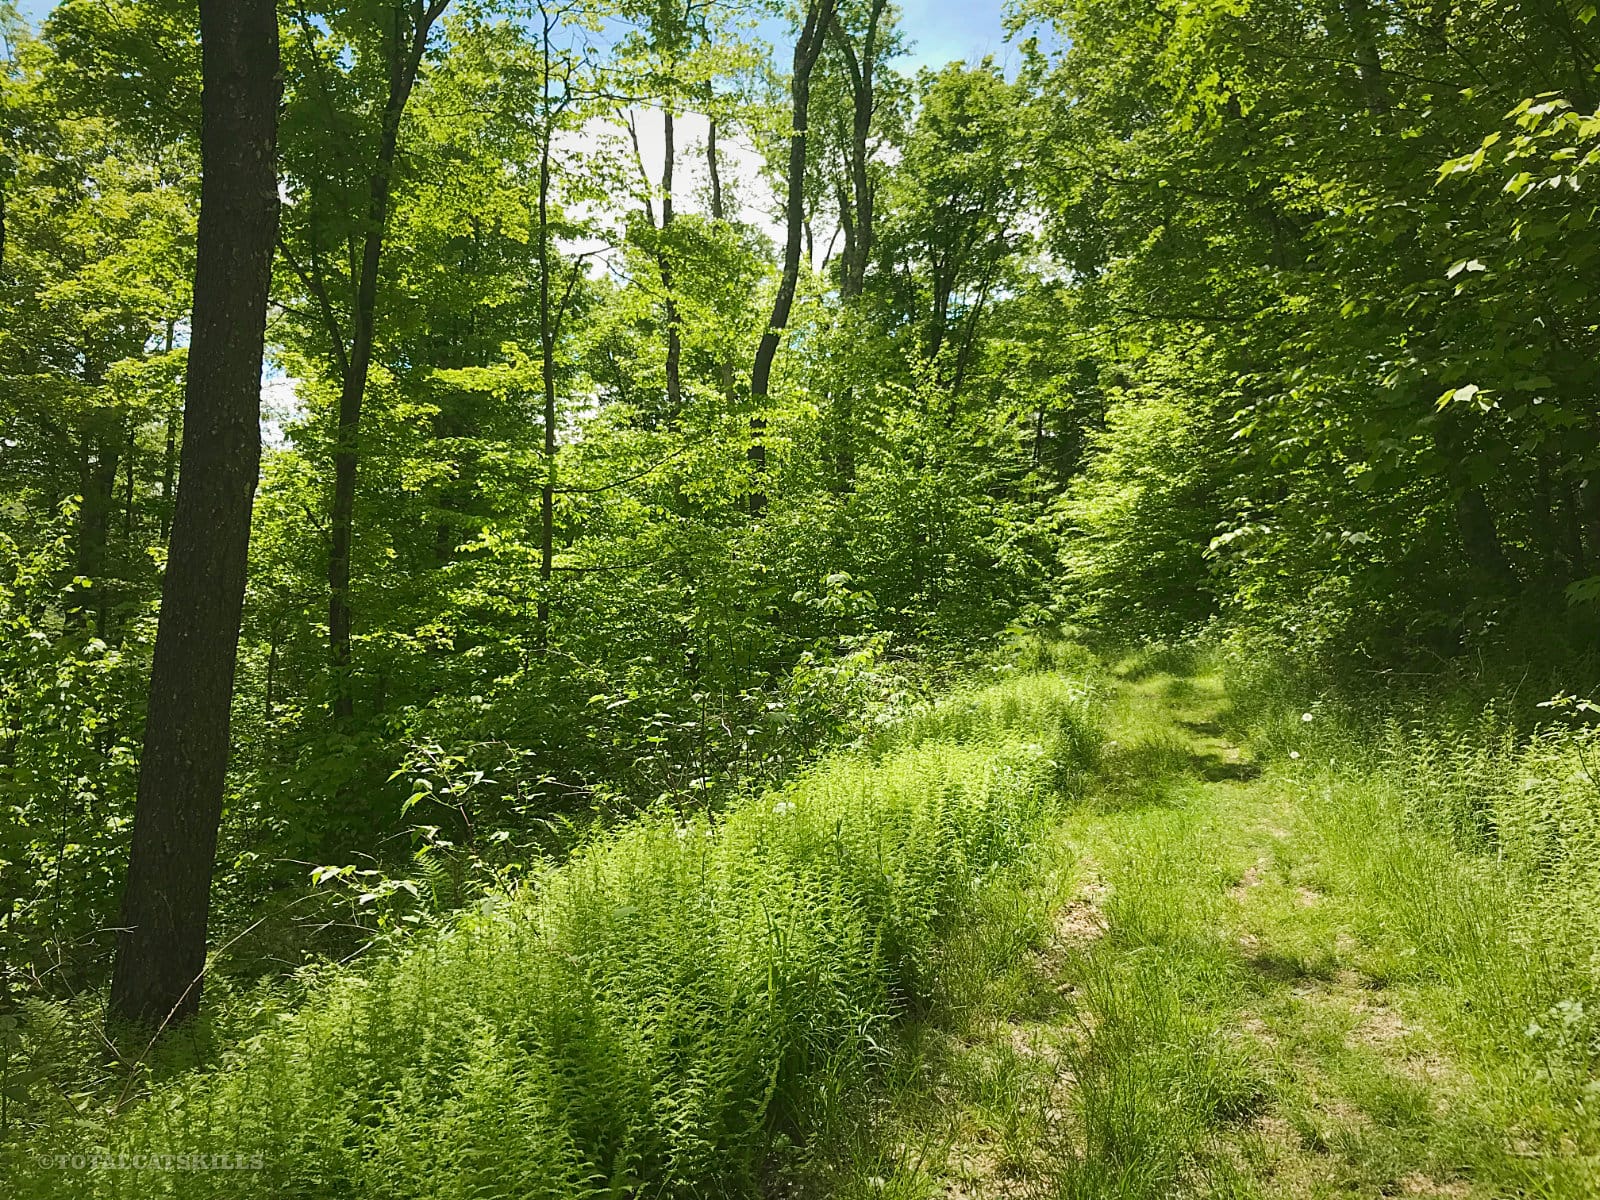 grassy hiking trail in forest